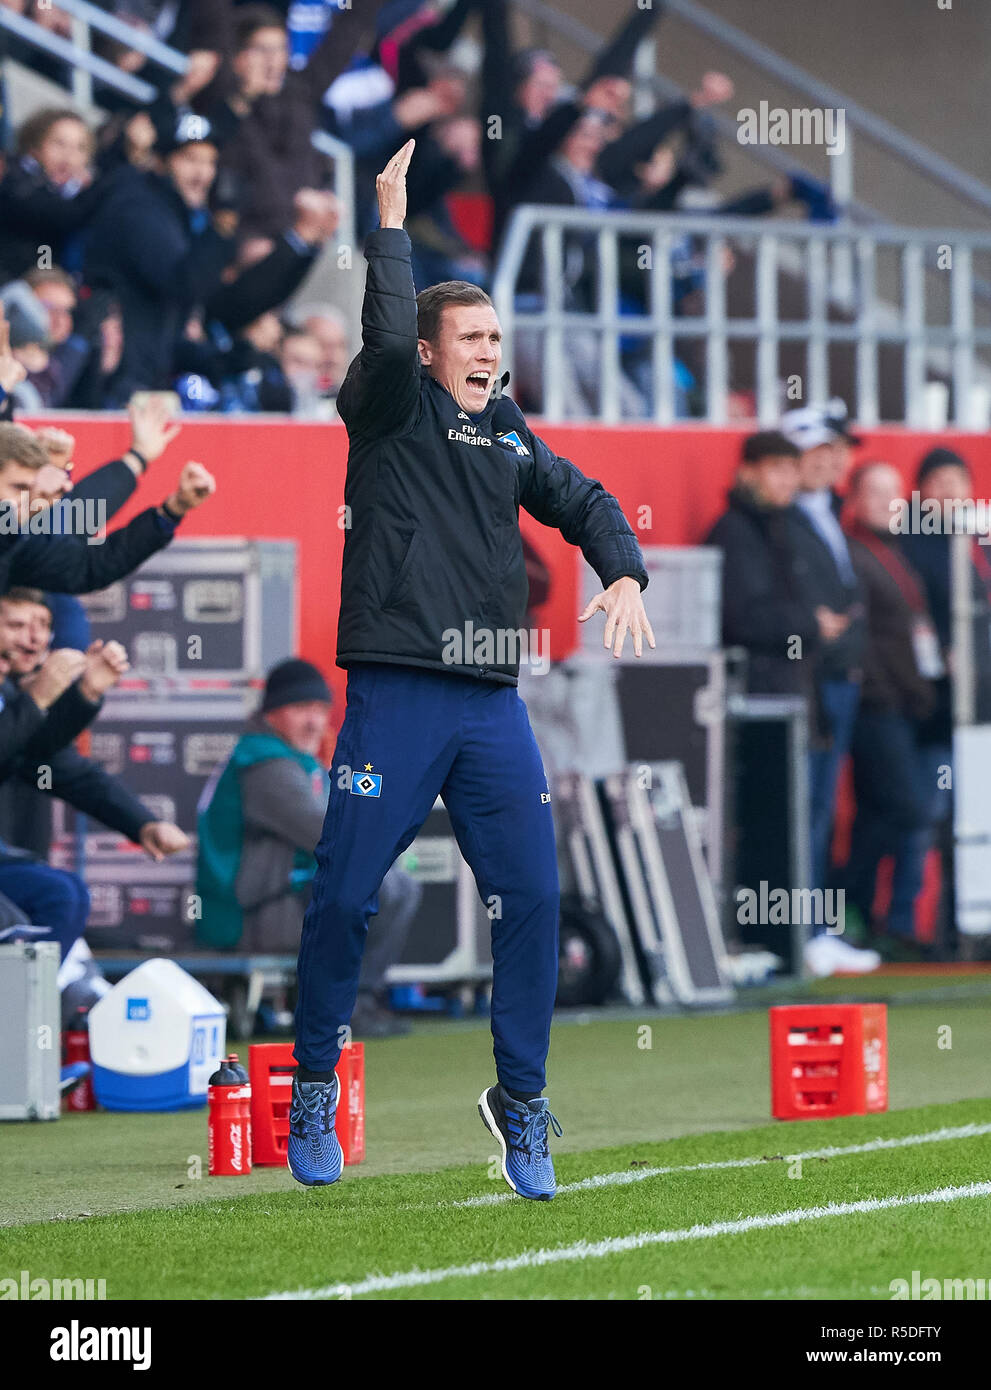 Ingolstadt, Germany, 1st December 2018.Germany, 1st December 2018. Hannes WOLF, Trainer HSV Torjubel 0-1 Aaron HUNT, HSV 14 Cheering, joy, emotions, celebrating, laughing, cheering, rejoice, tearing up the arms, clenching the fist, celebrate, celebration,  FC INGOLSTADT - HAMBURGER SV   - DFL REGULATIONS PROHIBIT ANY USE OF PHOTOGRAPHS as IMAGE SEQUENCES and/or QUASI-VIDEO -  2.German Soccer League , Ingolstadt, December 01, 2018  Season 2018/2019, matchday 15, HSV, Schanzer © Peter Schatz / Alamy Live News Stock Photo